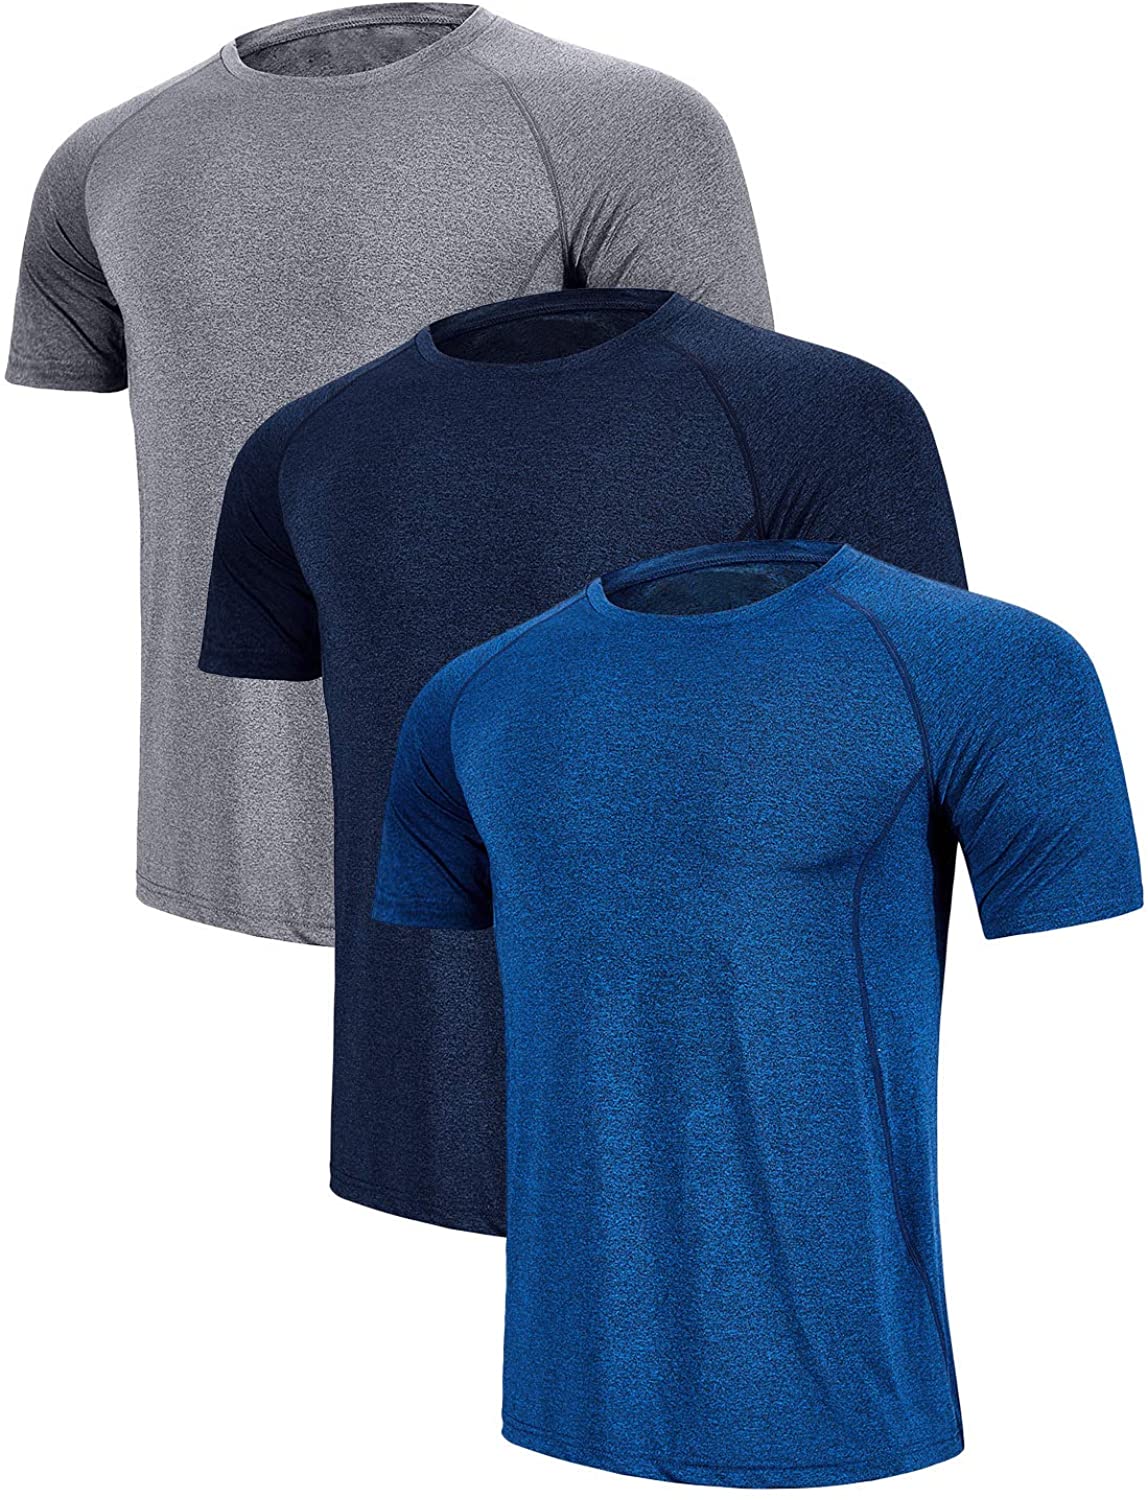 ZITY Men's Quick Dry T-Shirt Athletic Moisture-Wicking Dry Fit Running ...